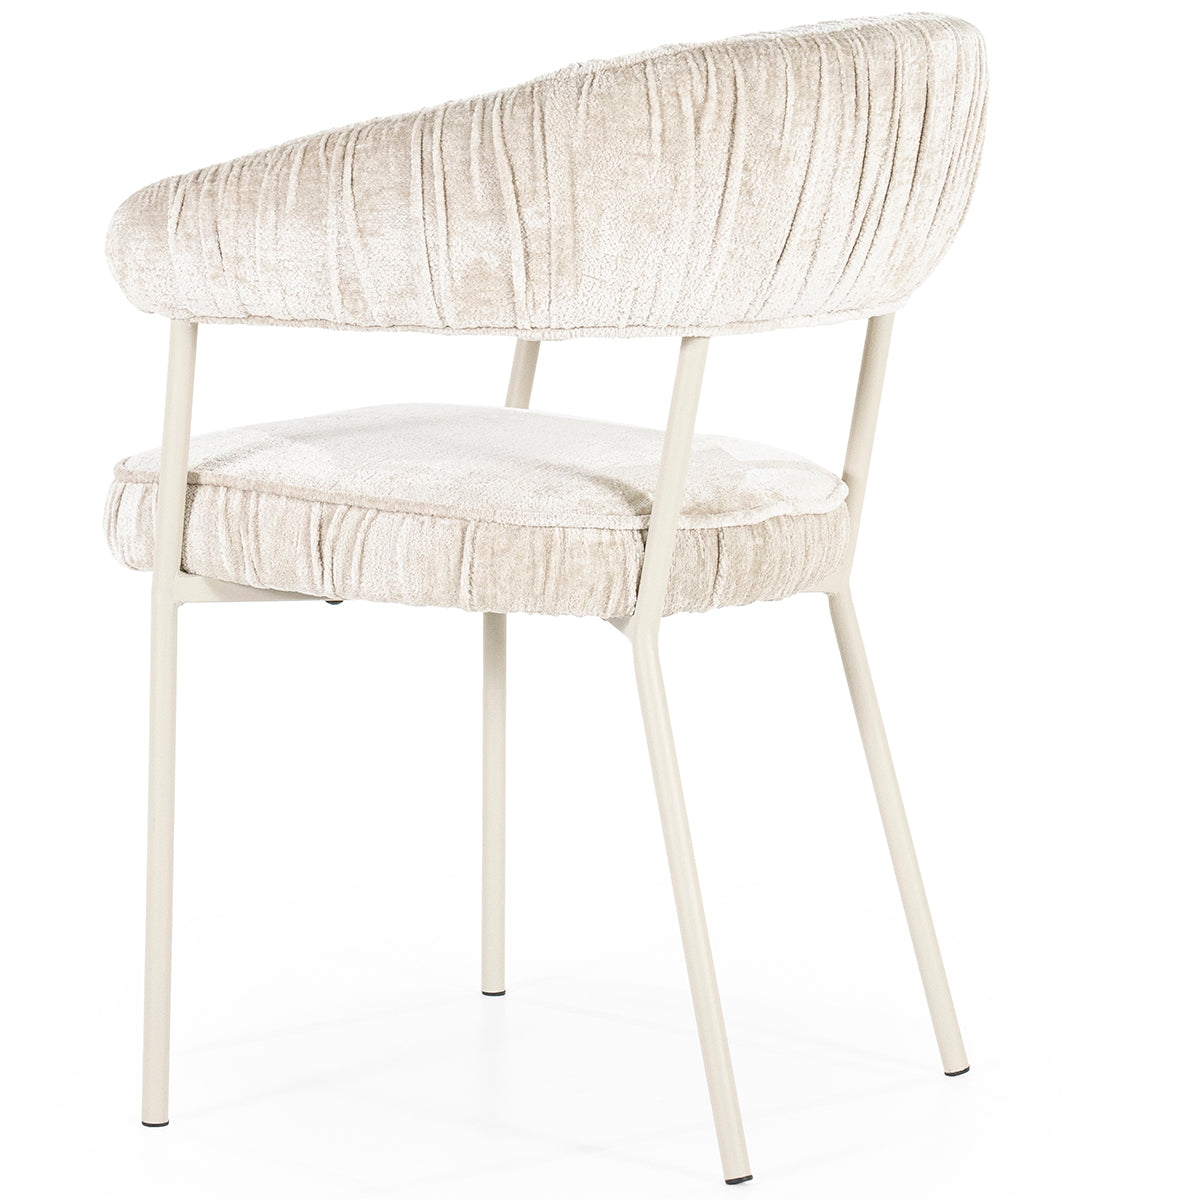 Lizzy Femme Chair